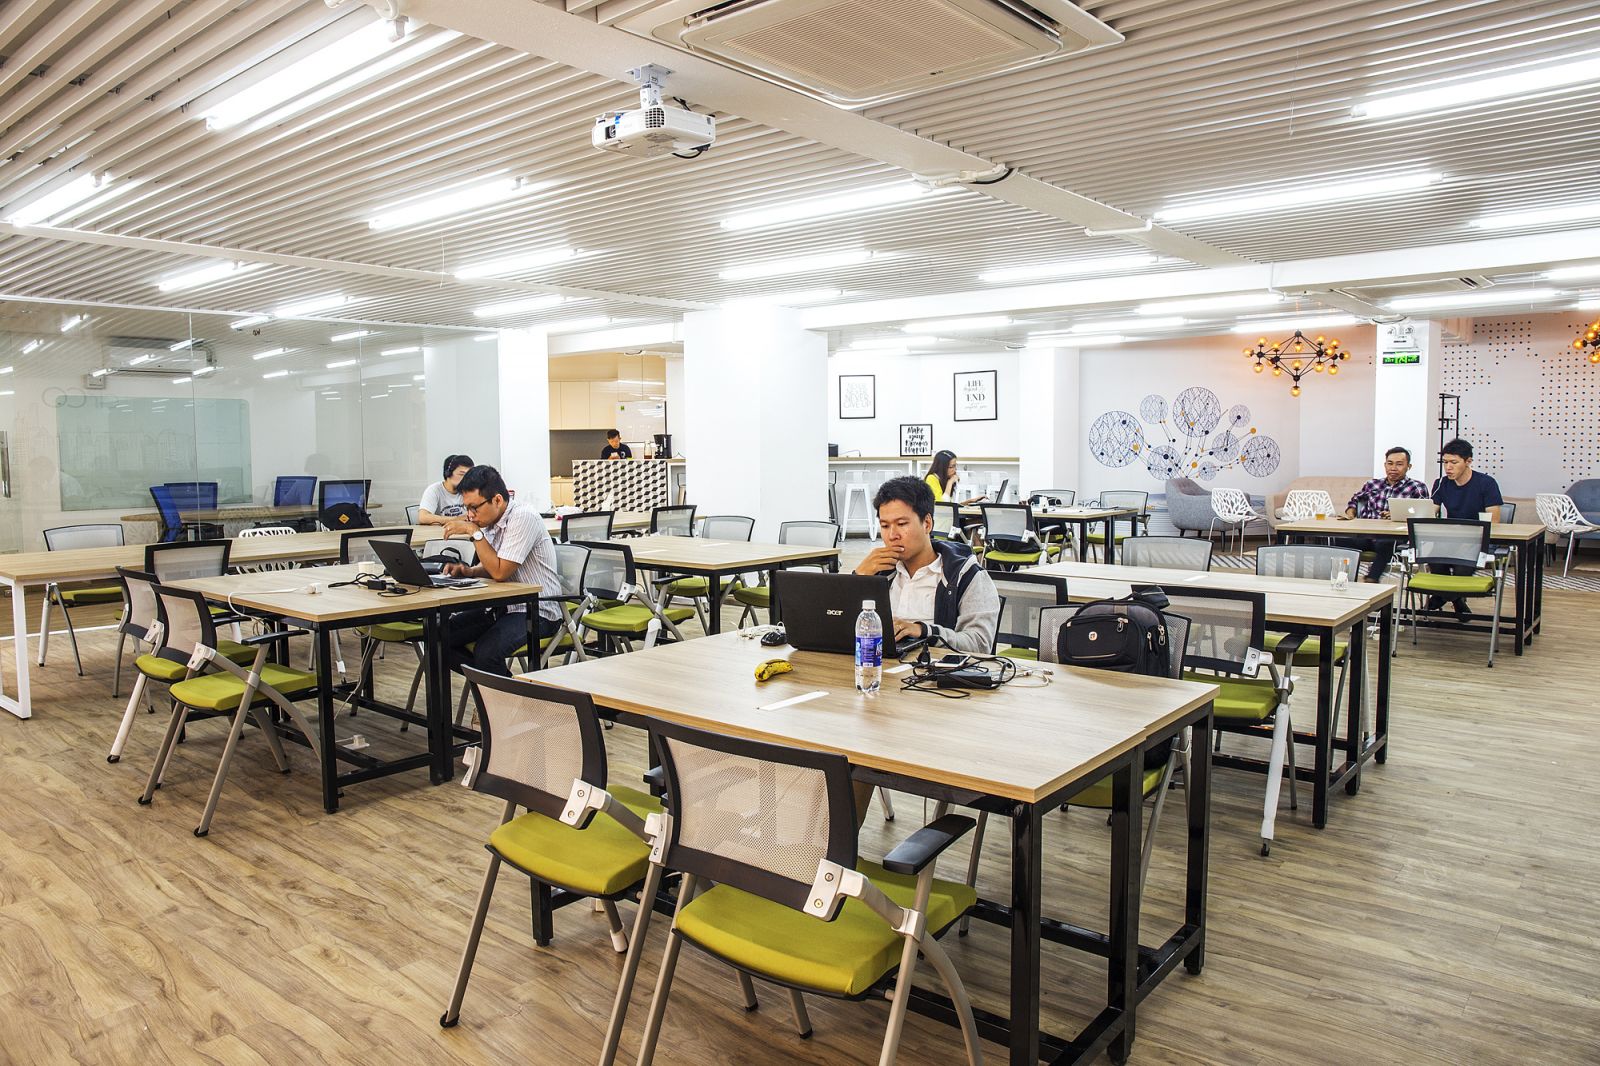  9 Things to look for when picking a coworking space